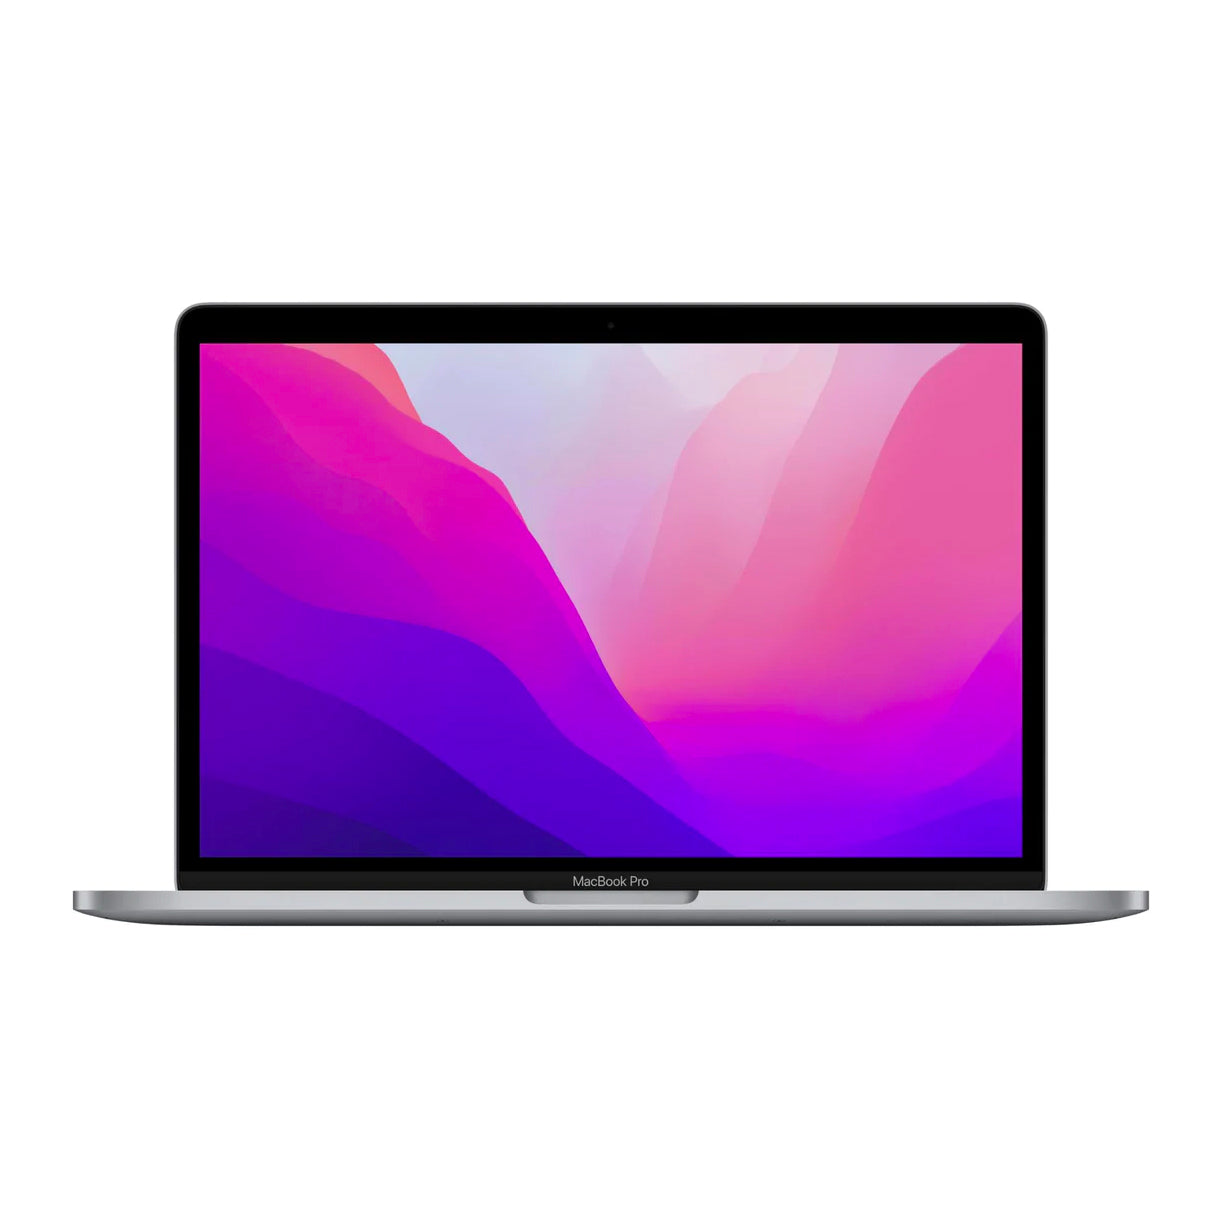 NEW Apple Macbook Pro with M1 Chip 13 Inch Laptop 2020 Model ( 8GB, 256GB  SSD) MYD82LL/A / MYD82ZP/A | With Apple International Warranty